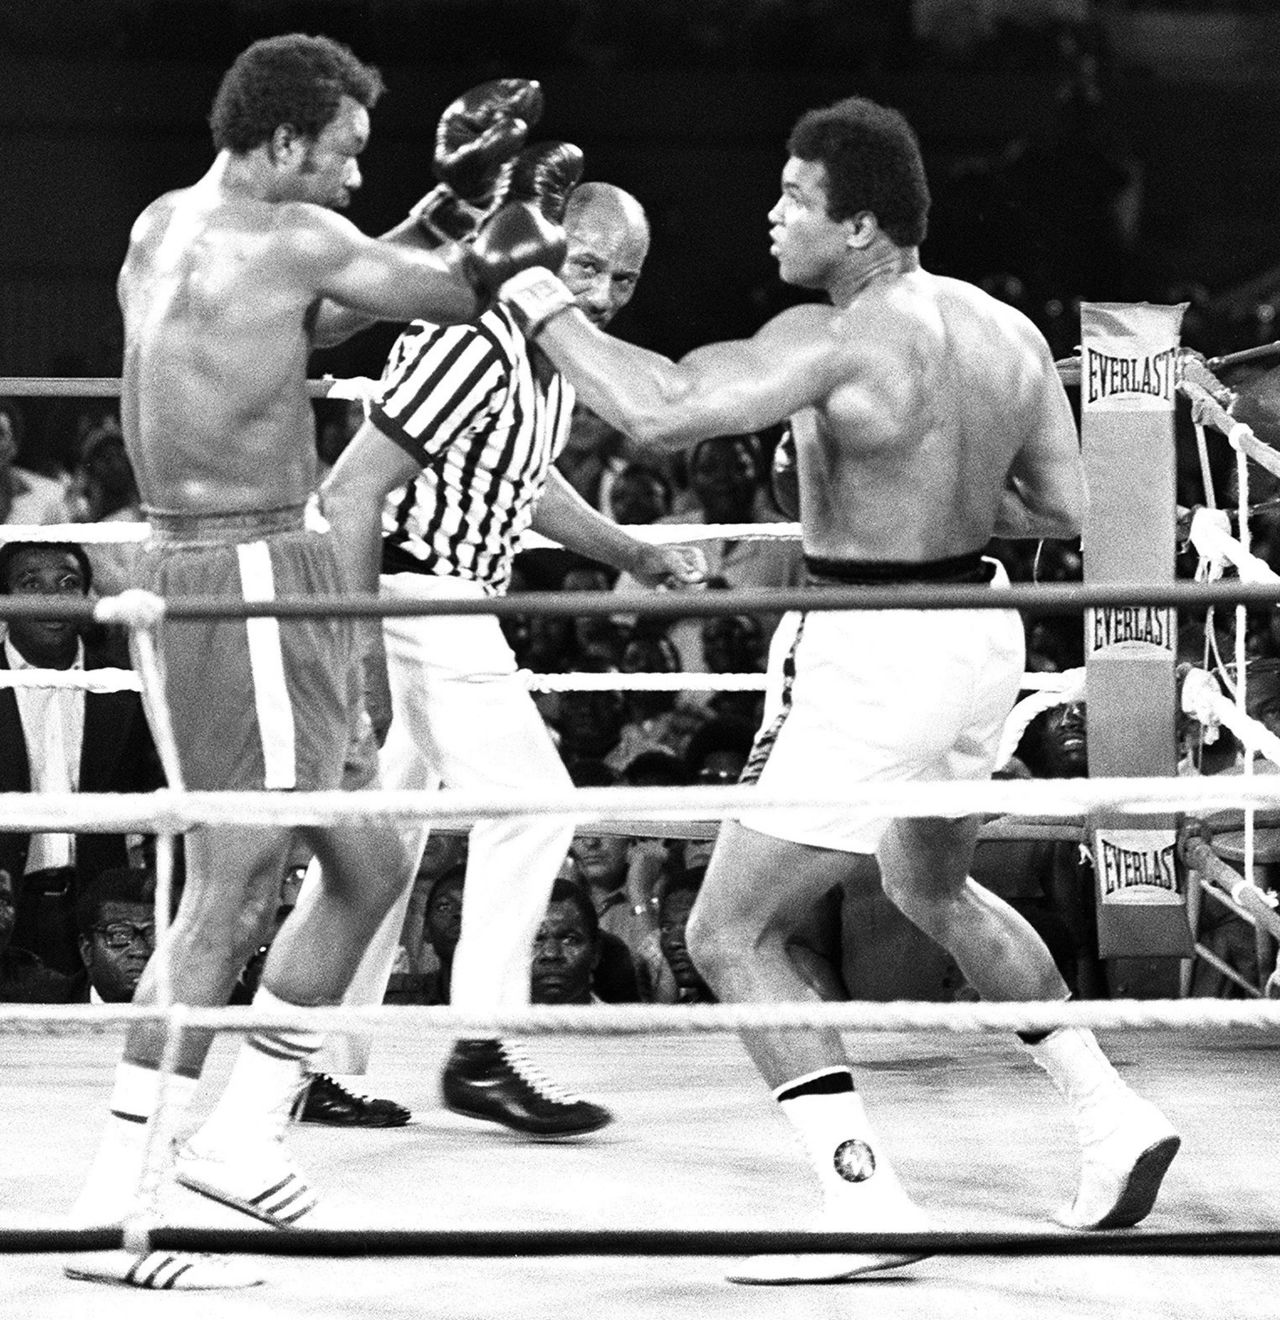 Ali's tactics bamboozled Foreman, who struggled to get on top of the challenger. "He became so confused by Ali's tactics that he finished the fourth round hurling wild swings into the air, and later missed so badly with the punch that was meant to finish it all that he almost went through the ropes," late sportswriter Ian Wooldridge wrote in the Daily Mail. "Ali slapped him on the bottom." 